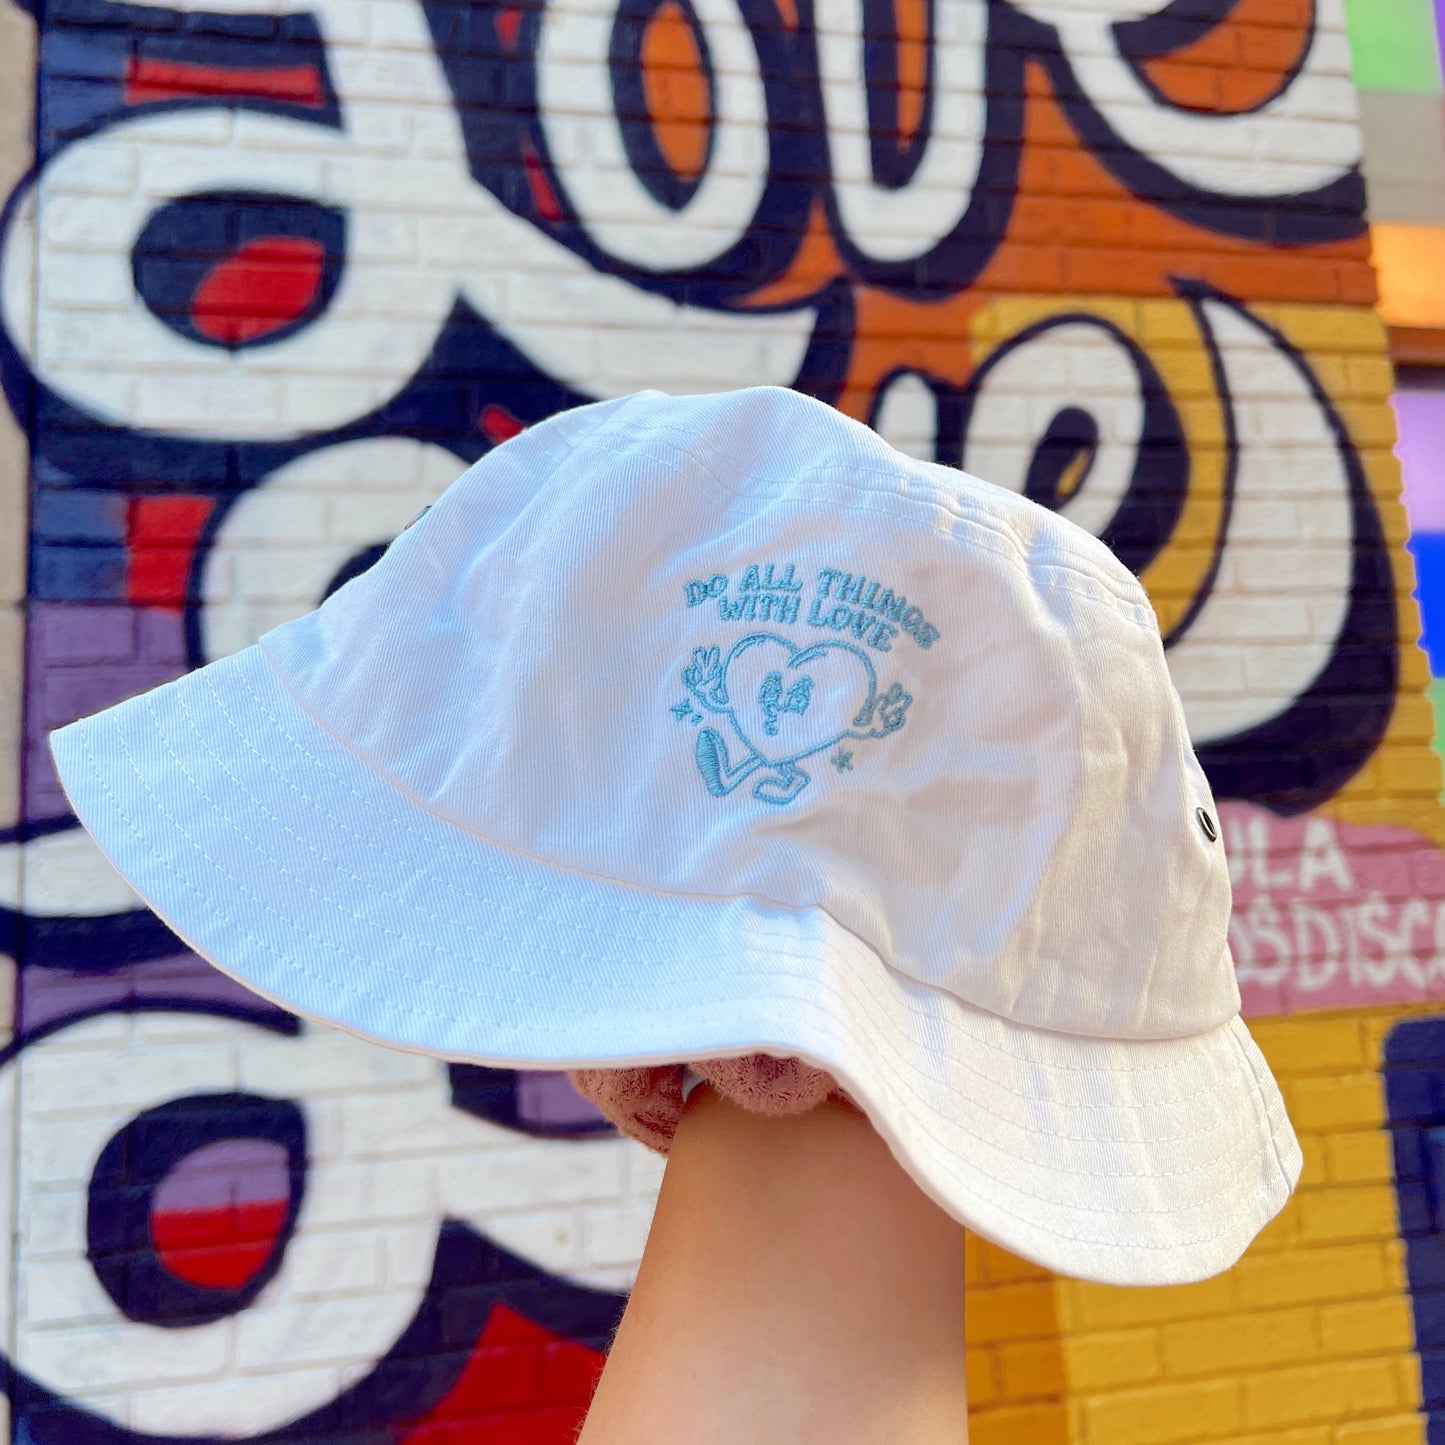 Do All Things With Love Bucket Hat - Alex Blom Creates